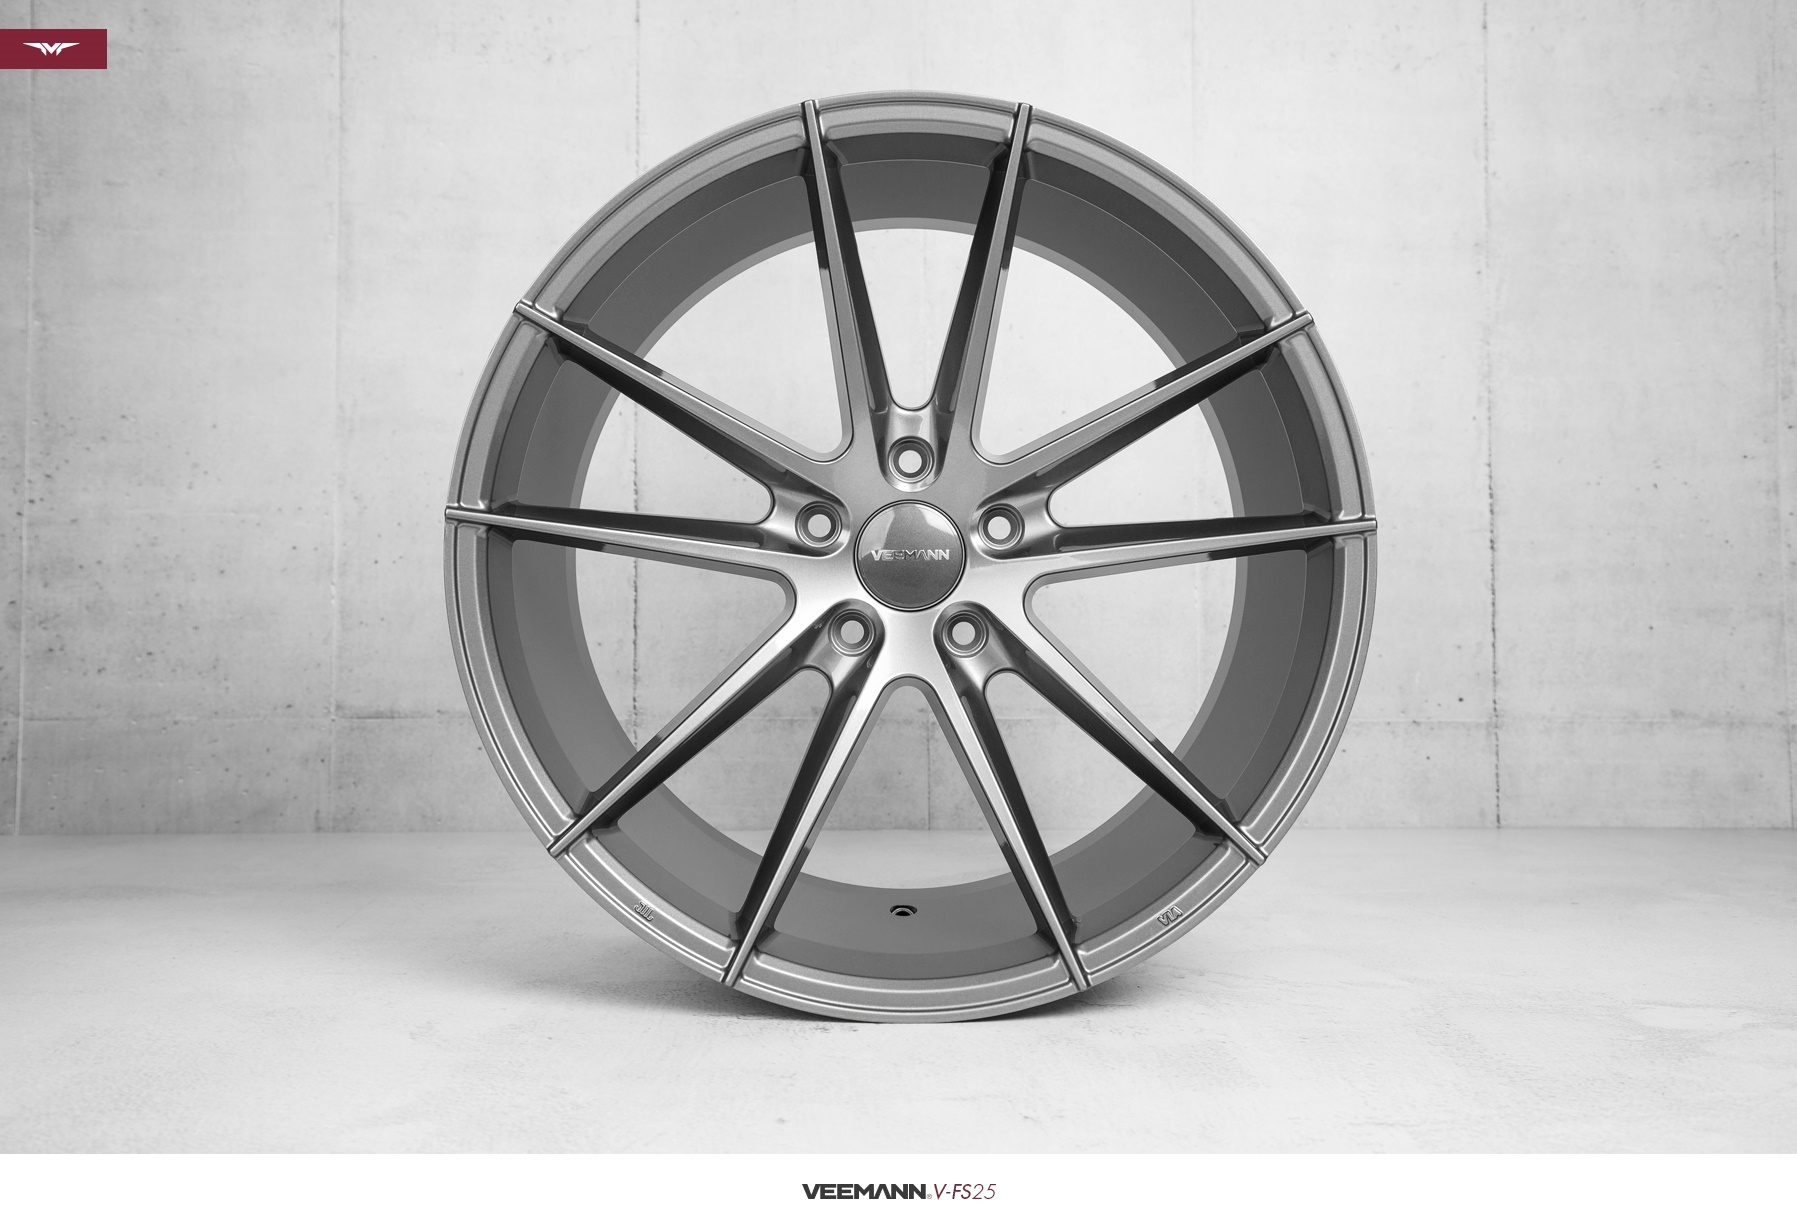 NEW 19" VEEMANN V-FS25 ALLOY WHEELS IN GLOSS GRAPHITE WITH WIDER 9.5" REARS